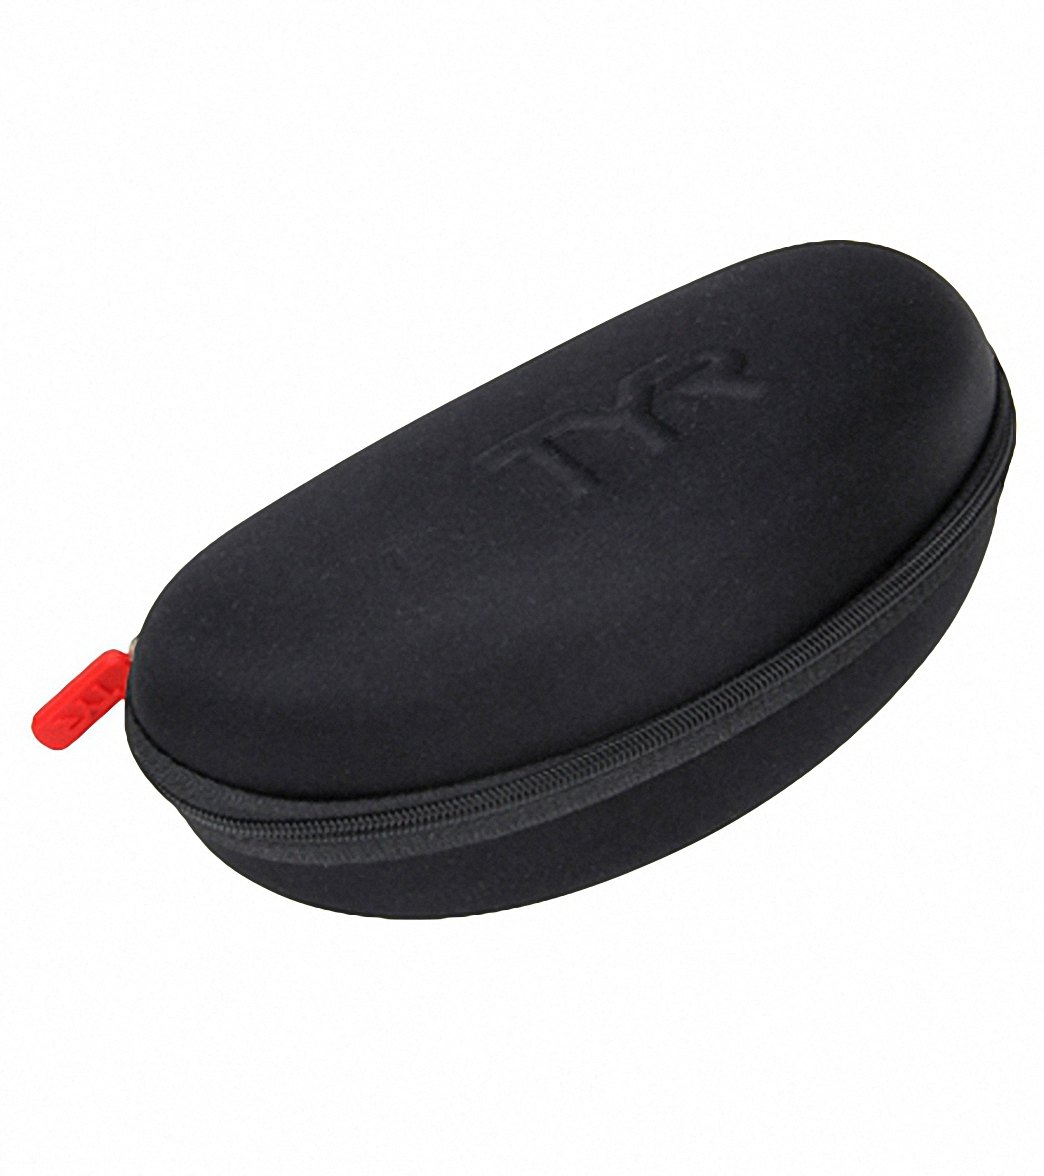 TYR Protective Goggle Case